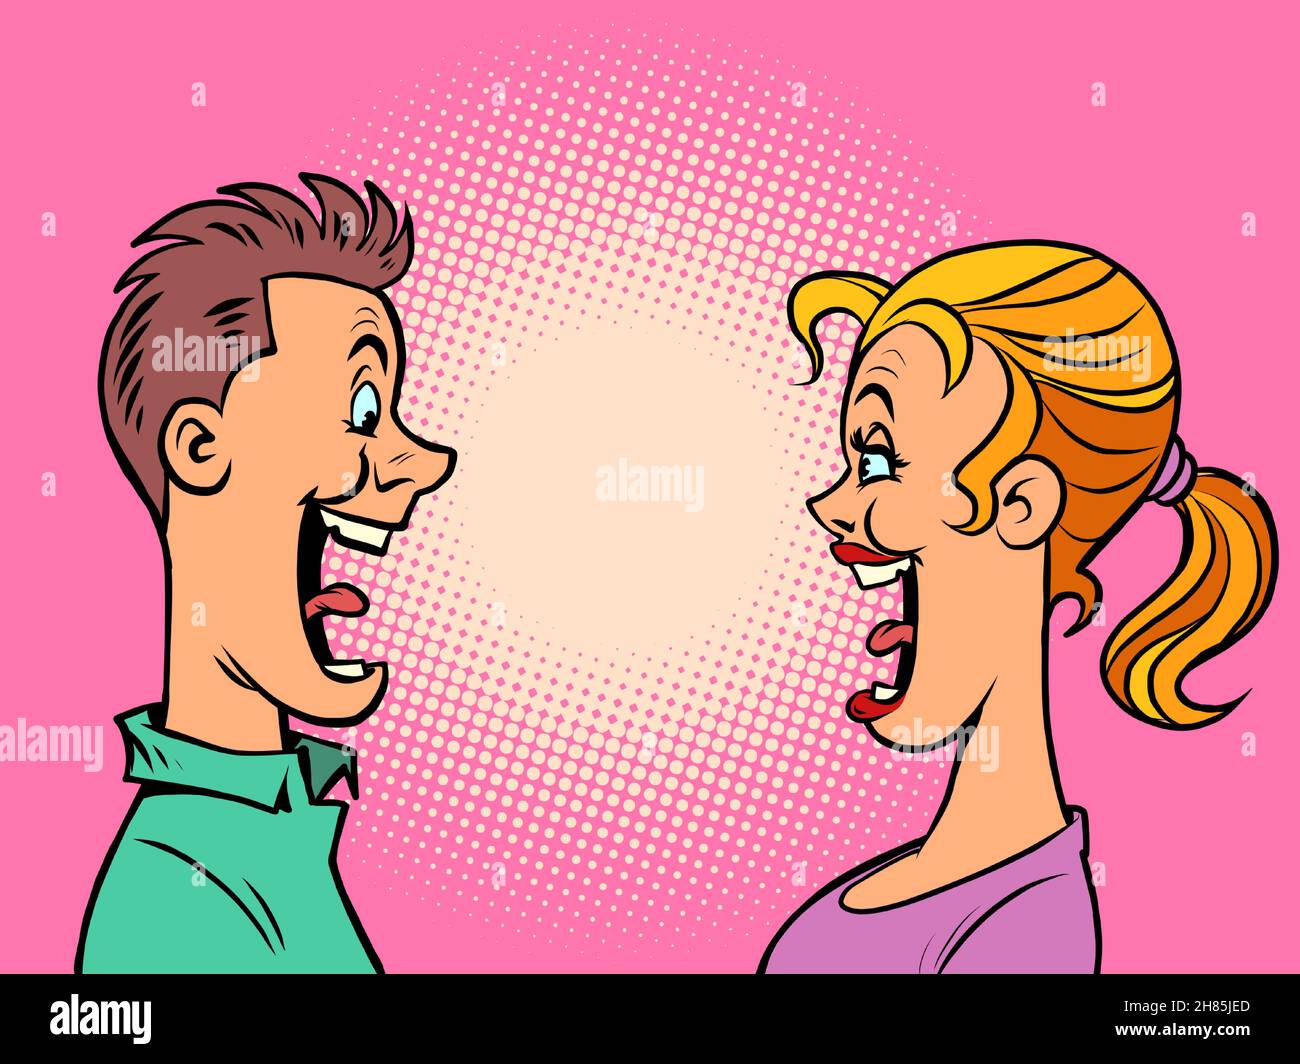 joyful date of young man and woman, boyfriend and girlfriend Stock Vector